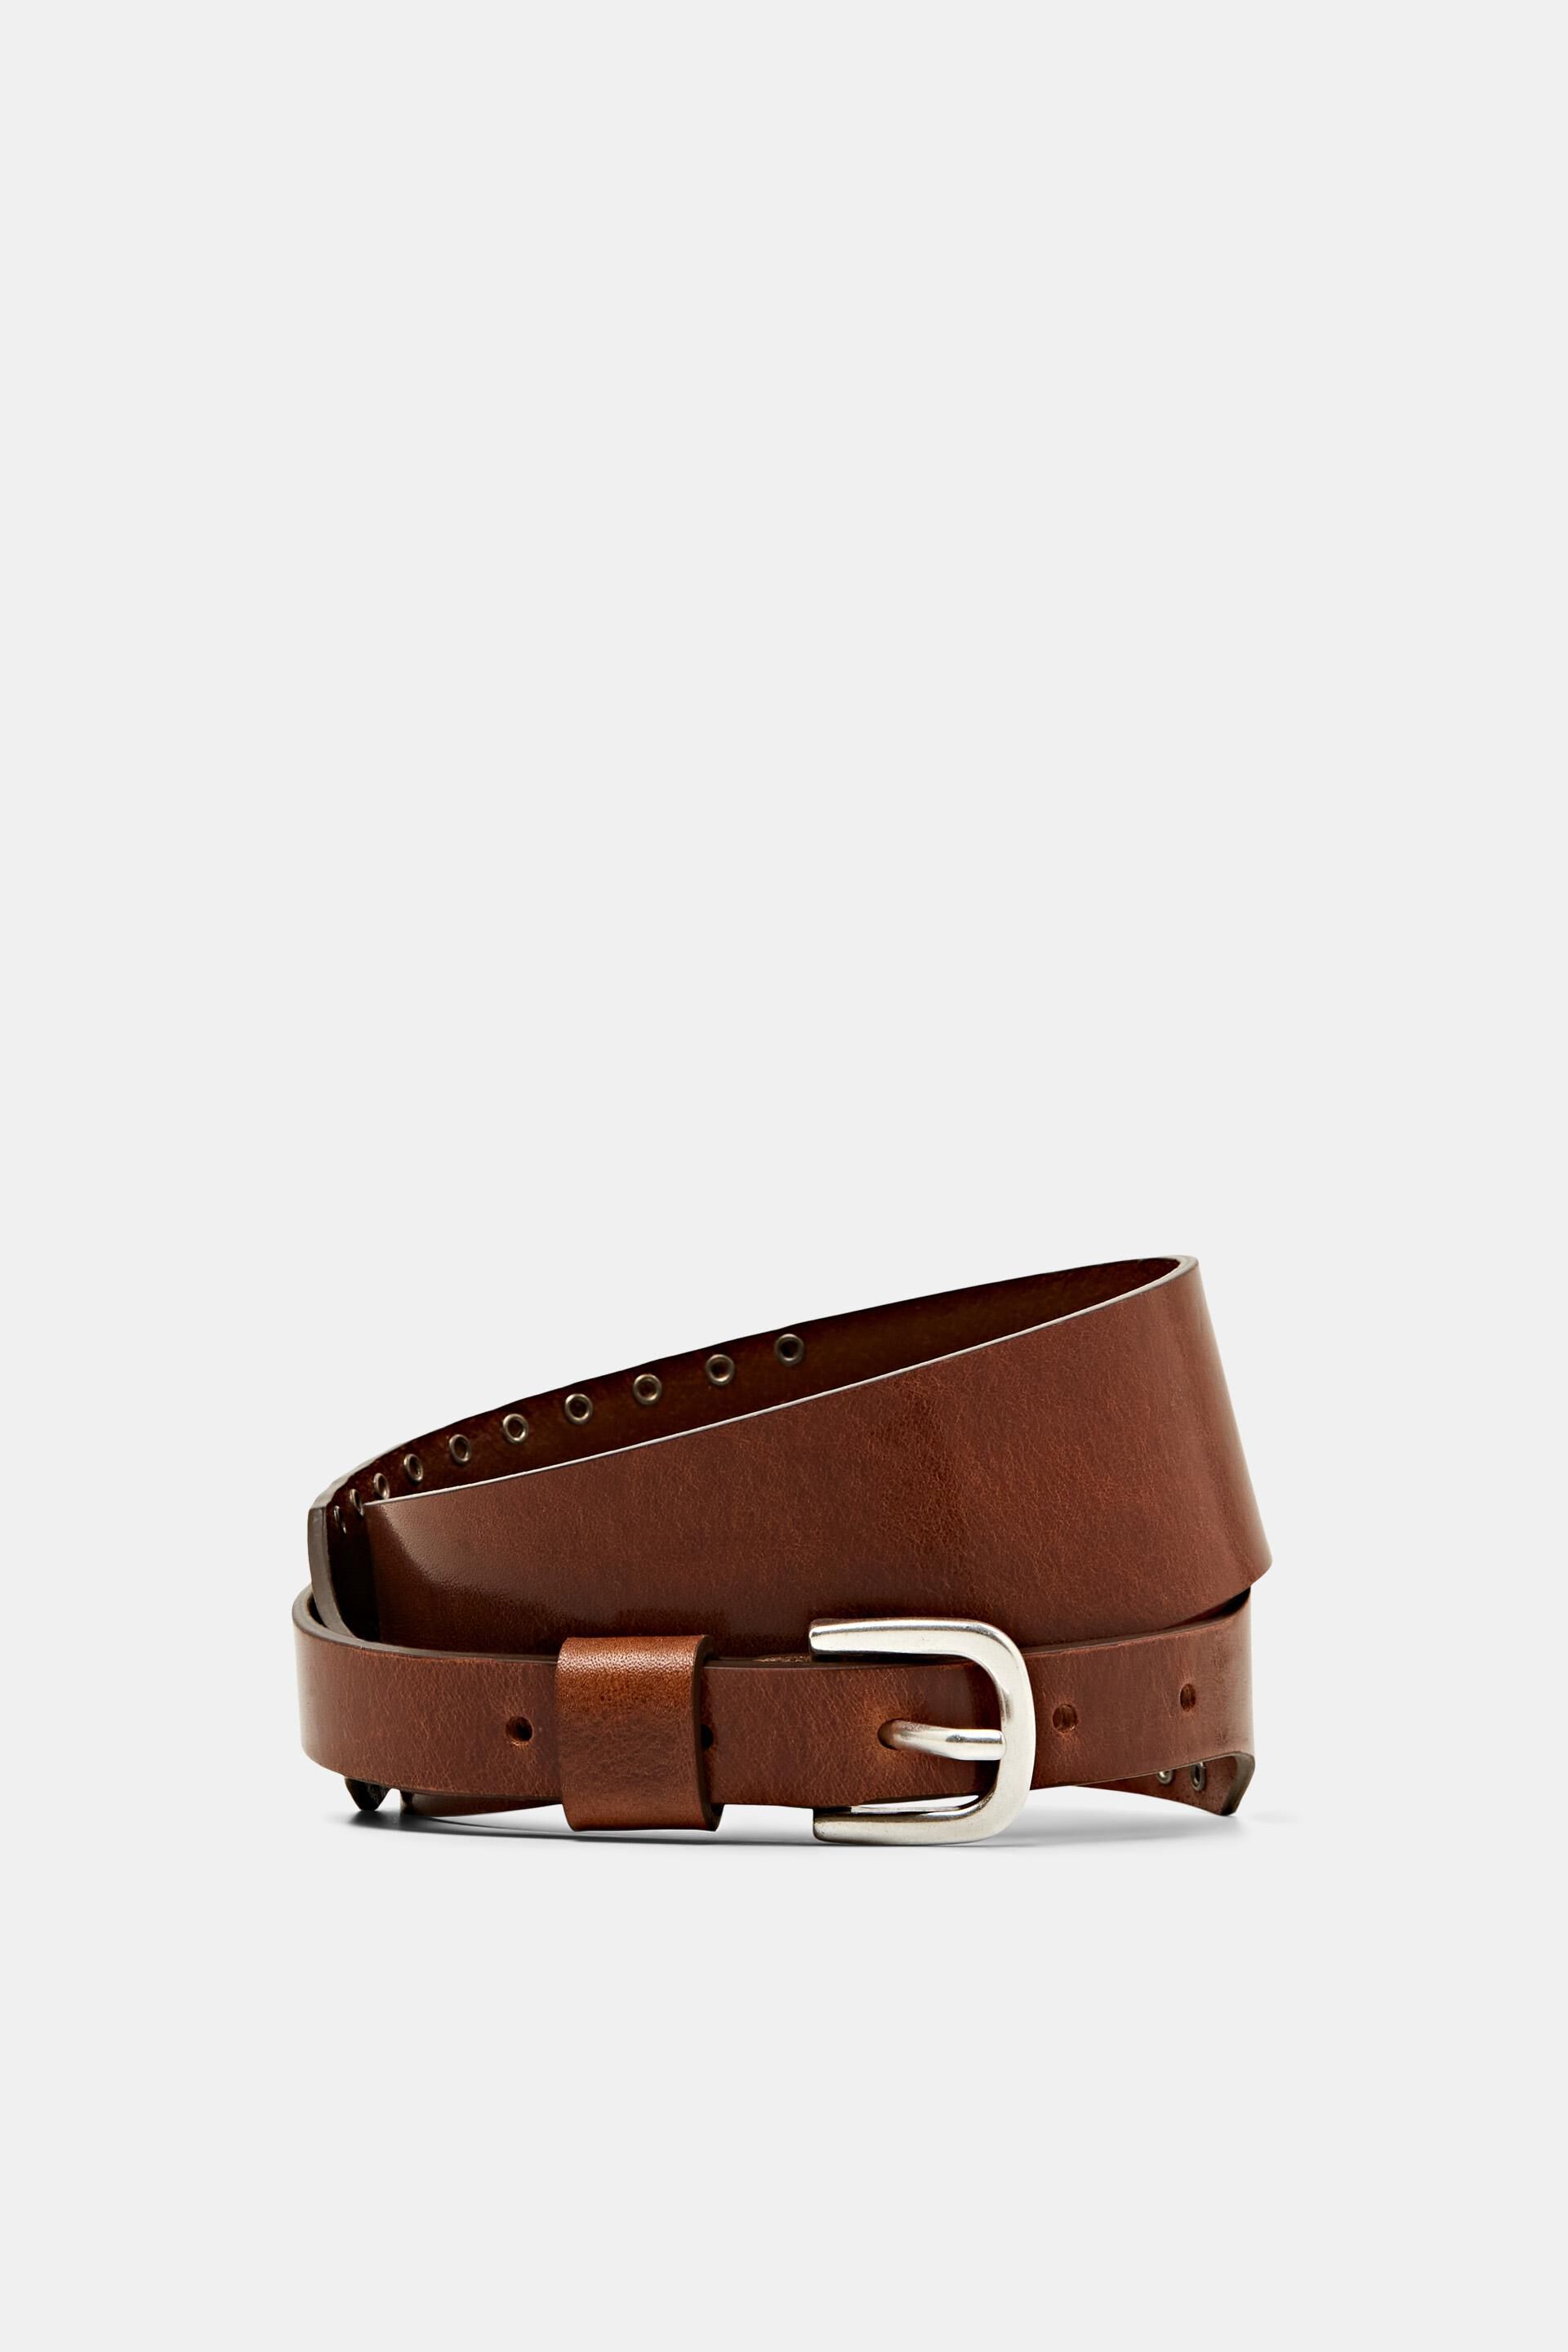 Esprit Online Store Waist belt with studs, 100% leather real